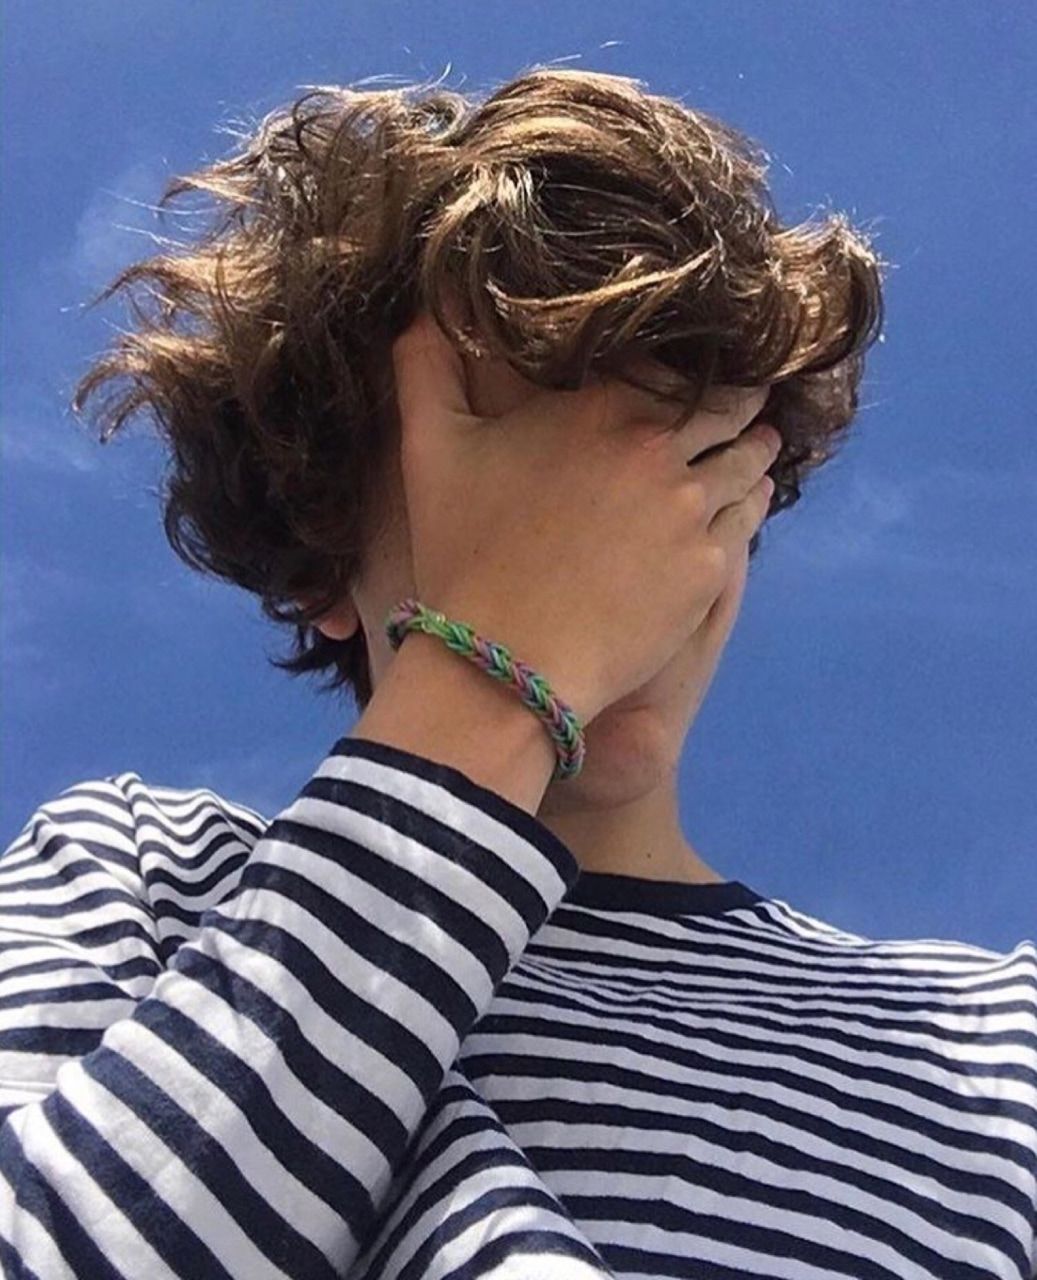 A boy with curly hair covering his face - Timothee Chalamet